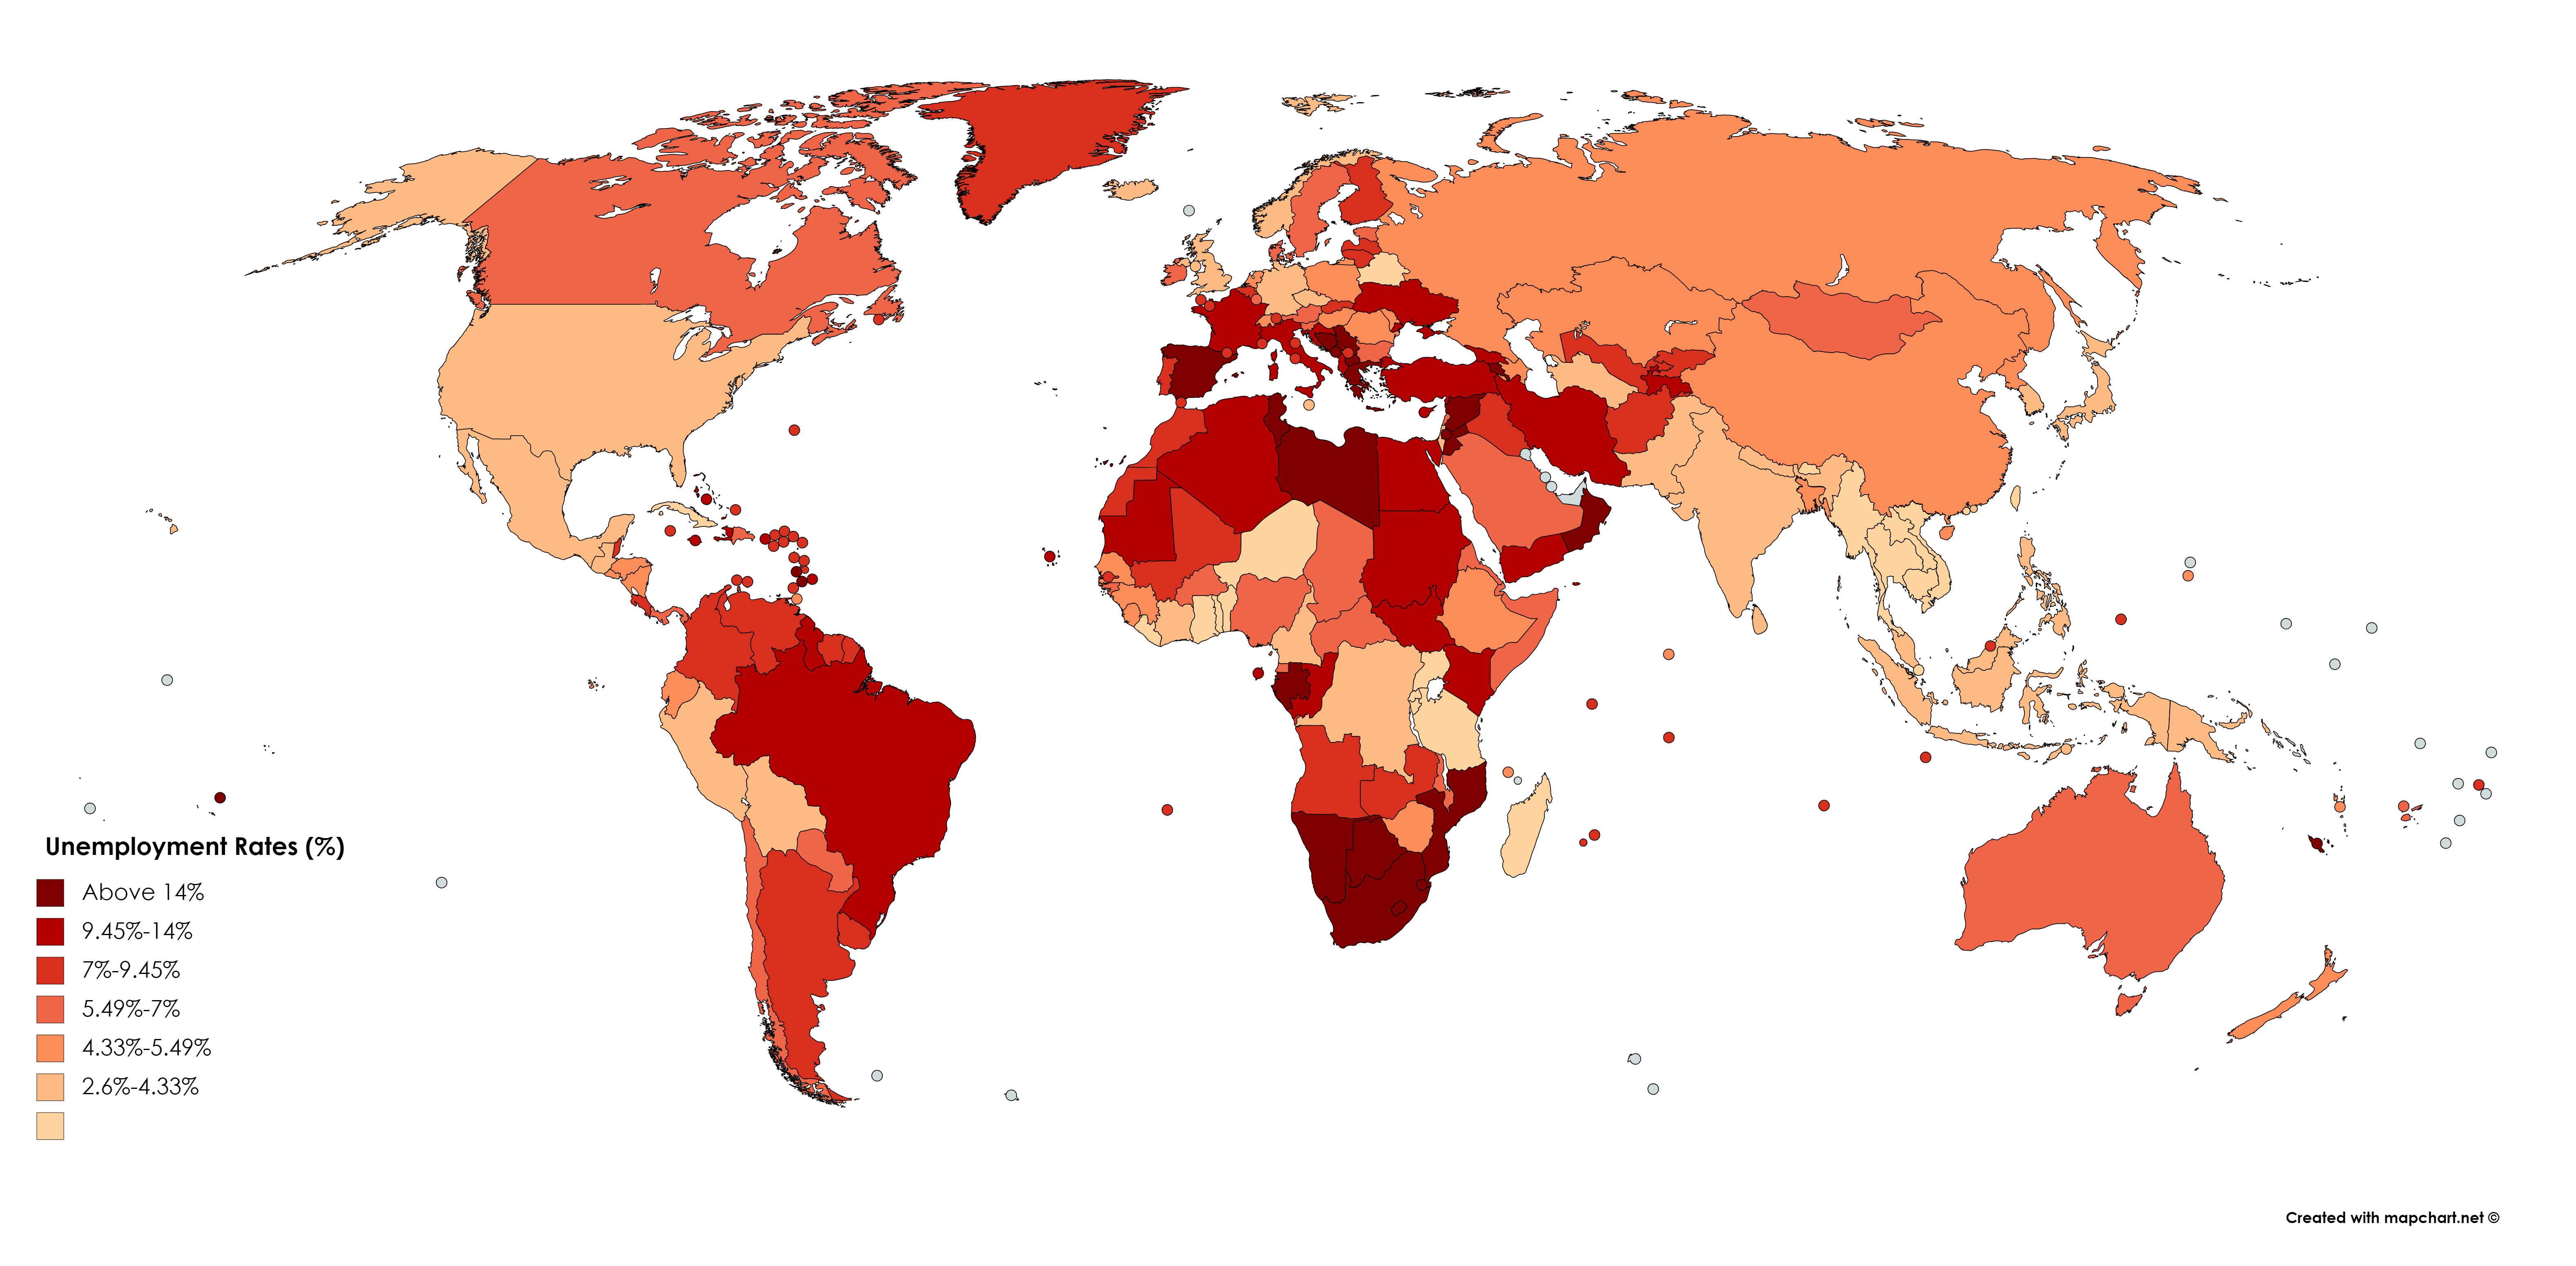 Unemployment rates across the world (June 2018) : MapPorn